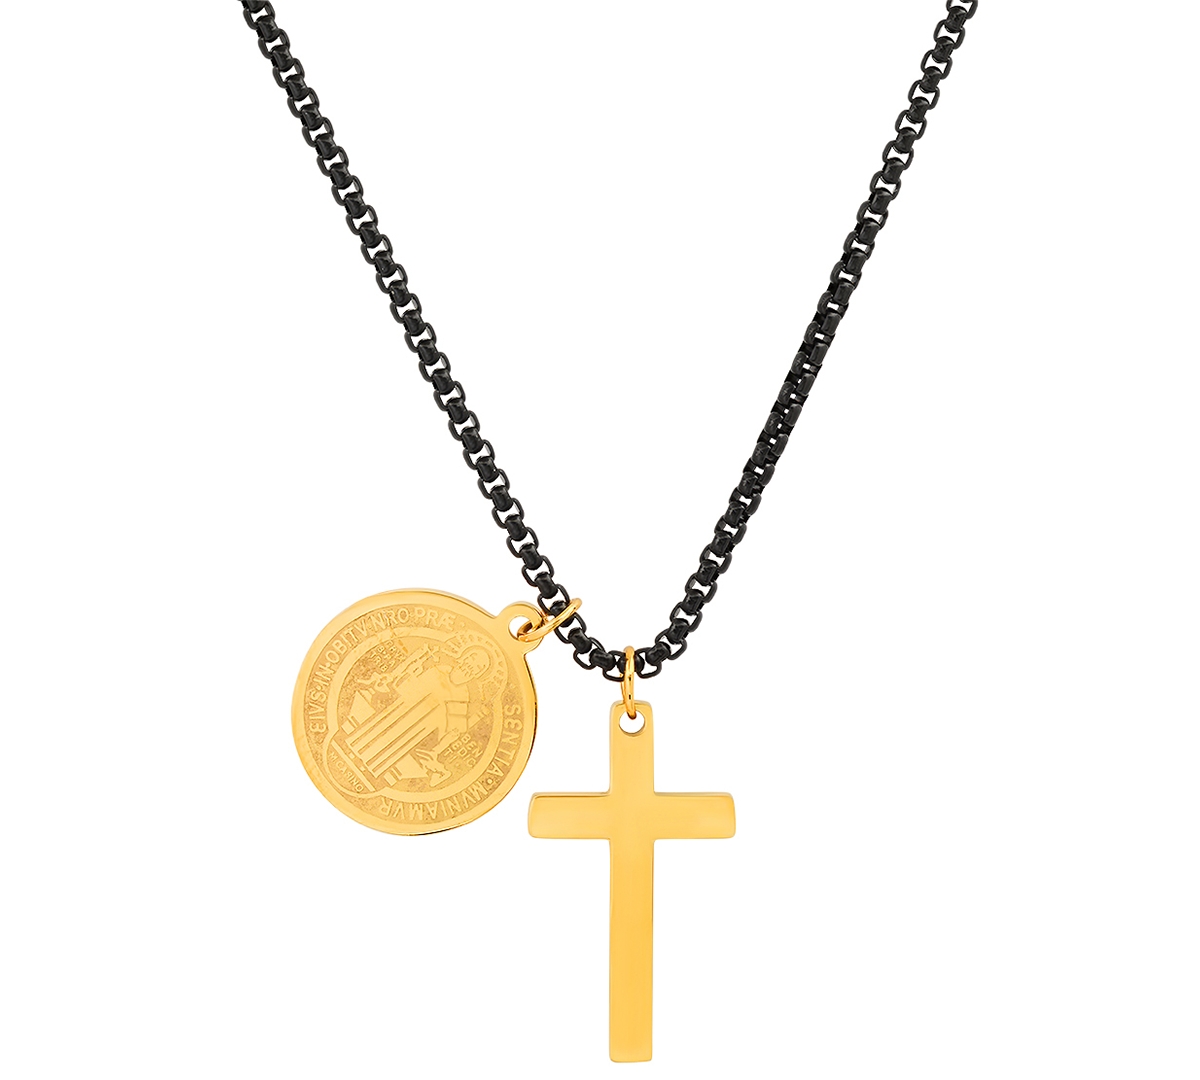 Men's Black-Tone Ip & 18k Gold-Plated Stainless Steel Cross and St. Benedict Religious 24" Pendant Necklace - Black, Gold